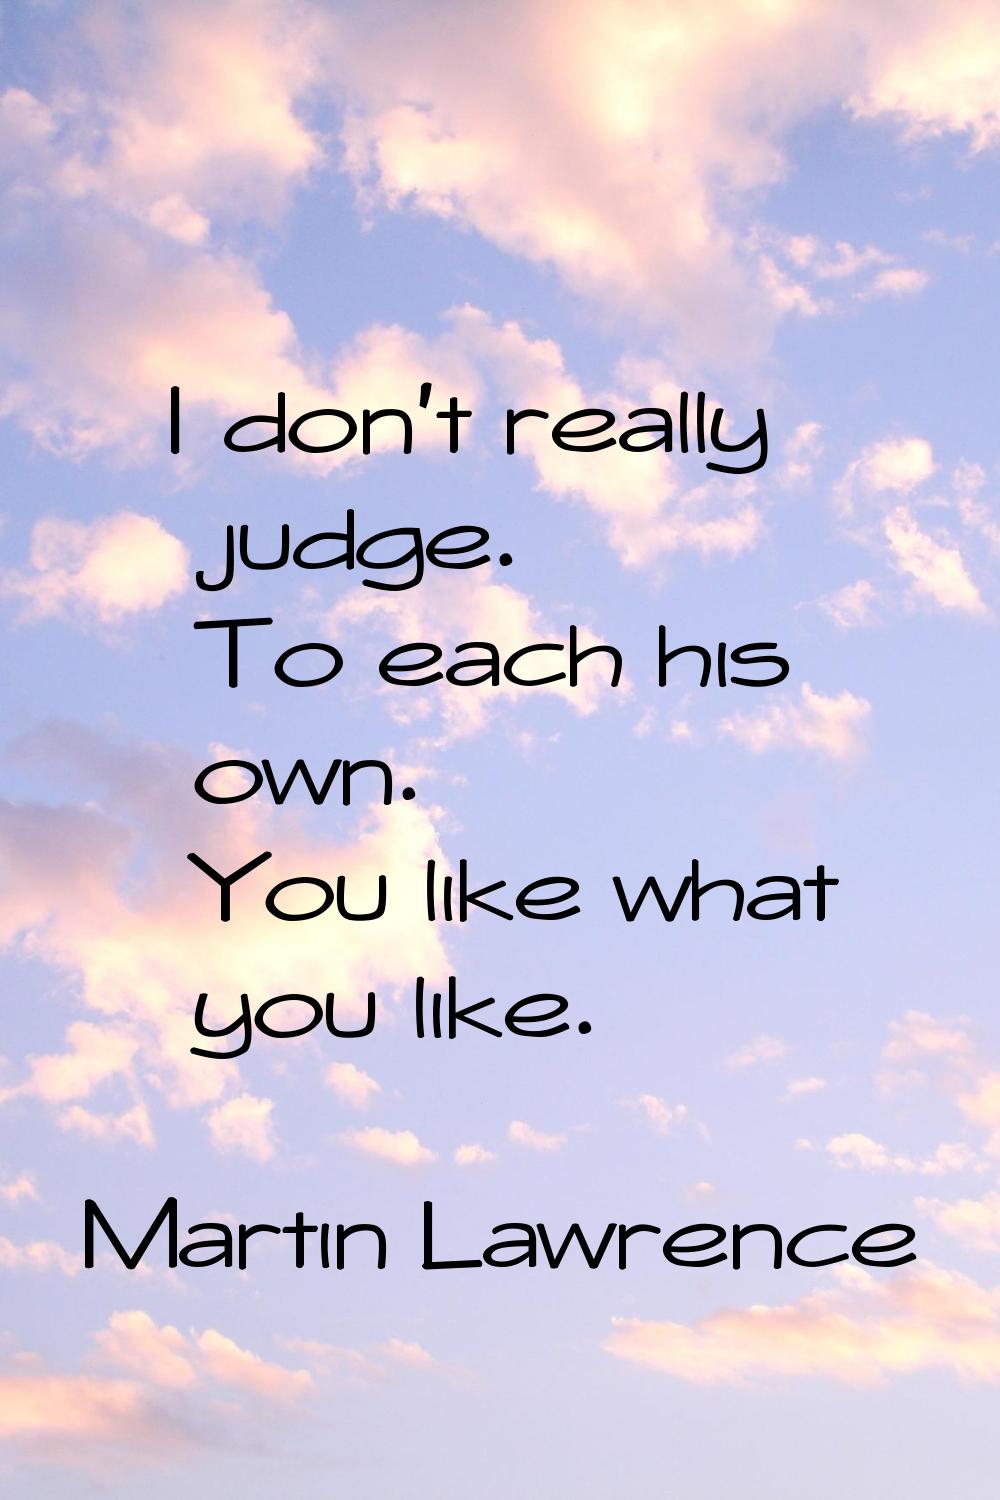 I don't really judge. To each his own. You like what you like.